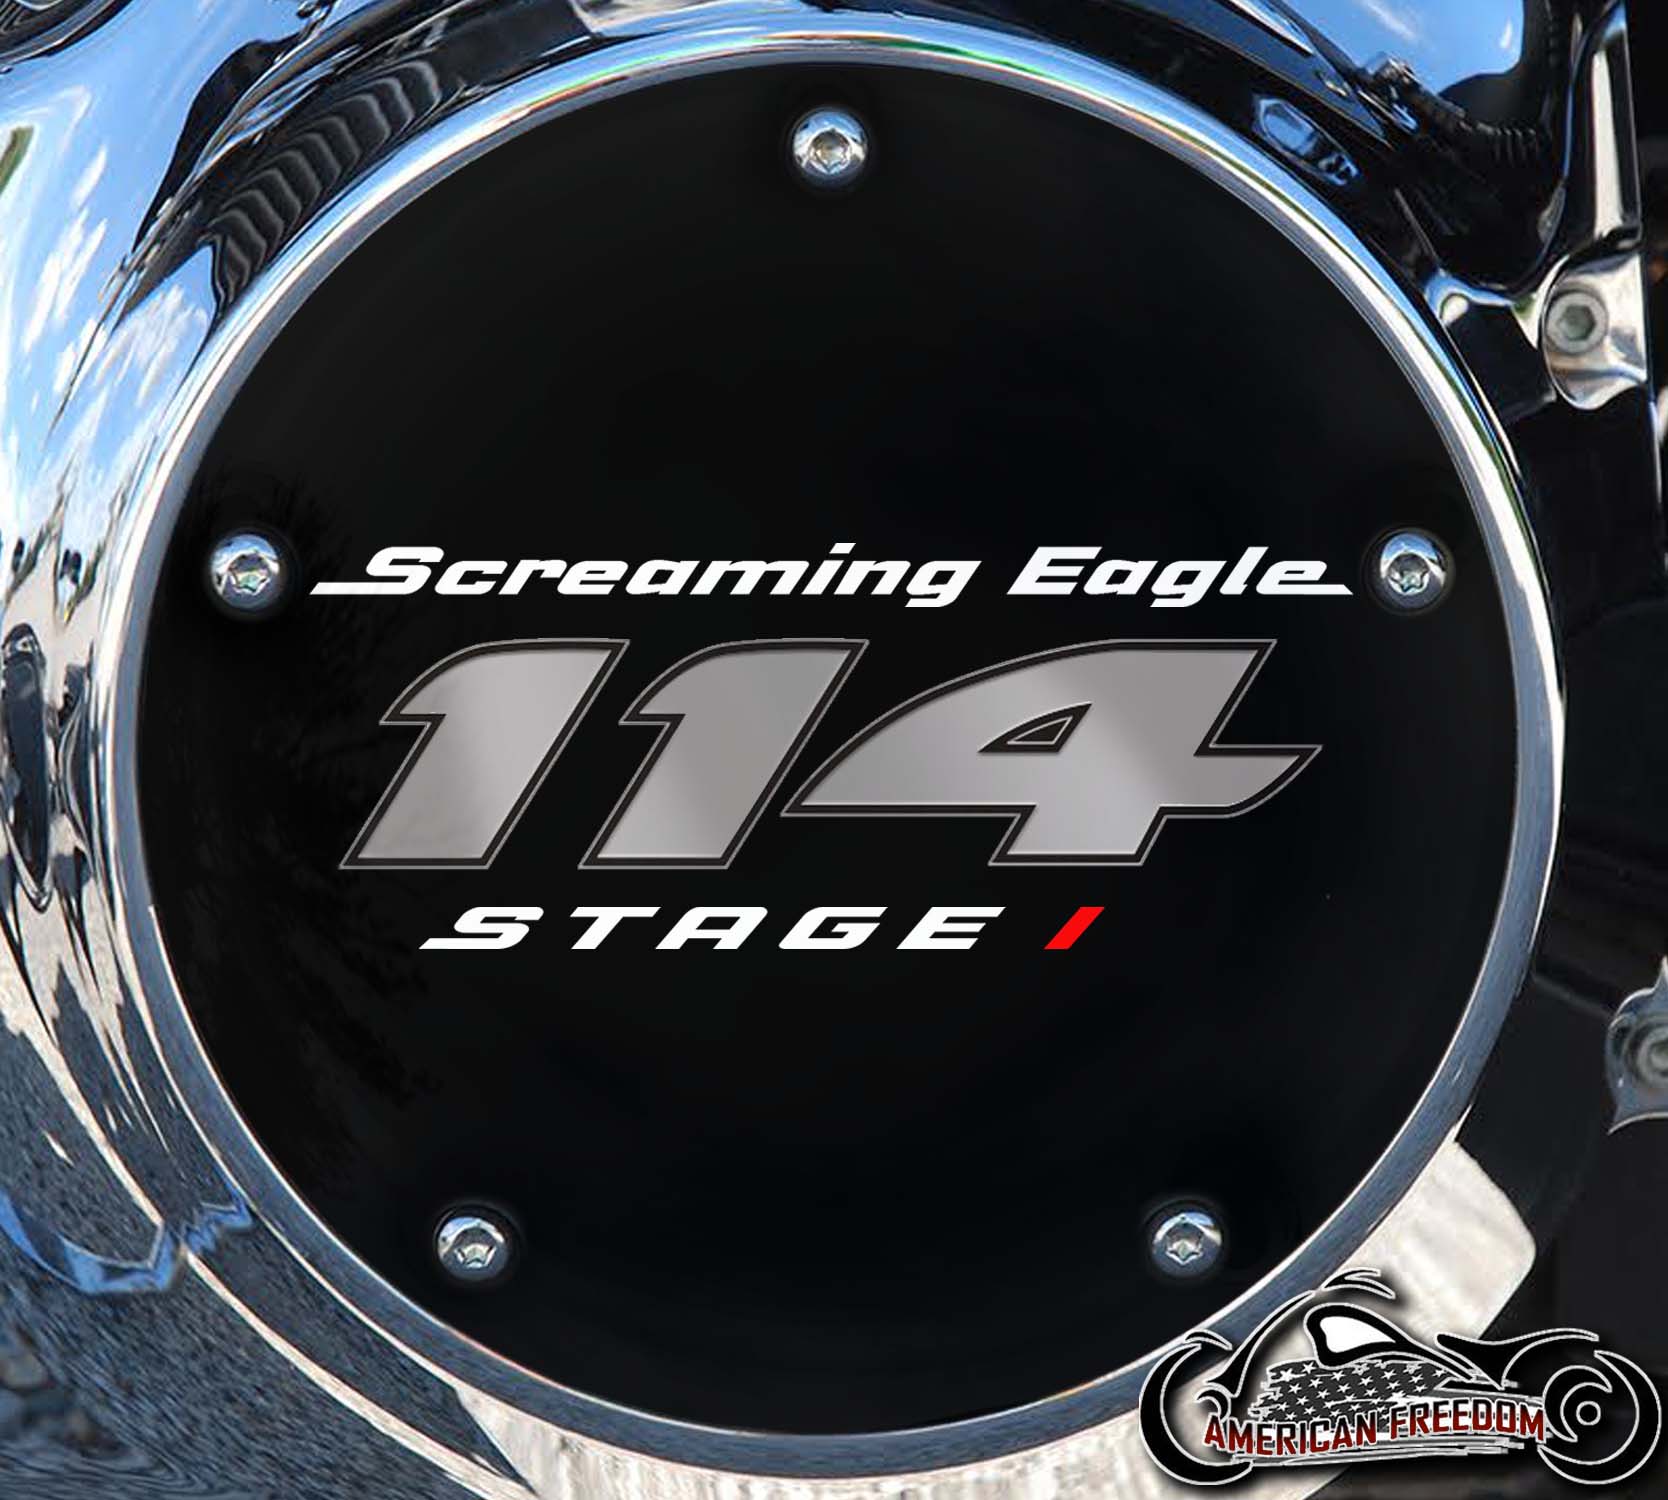 Screaming Eagle Stage I 114 DERBY COVER